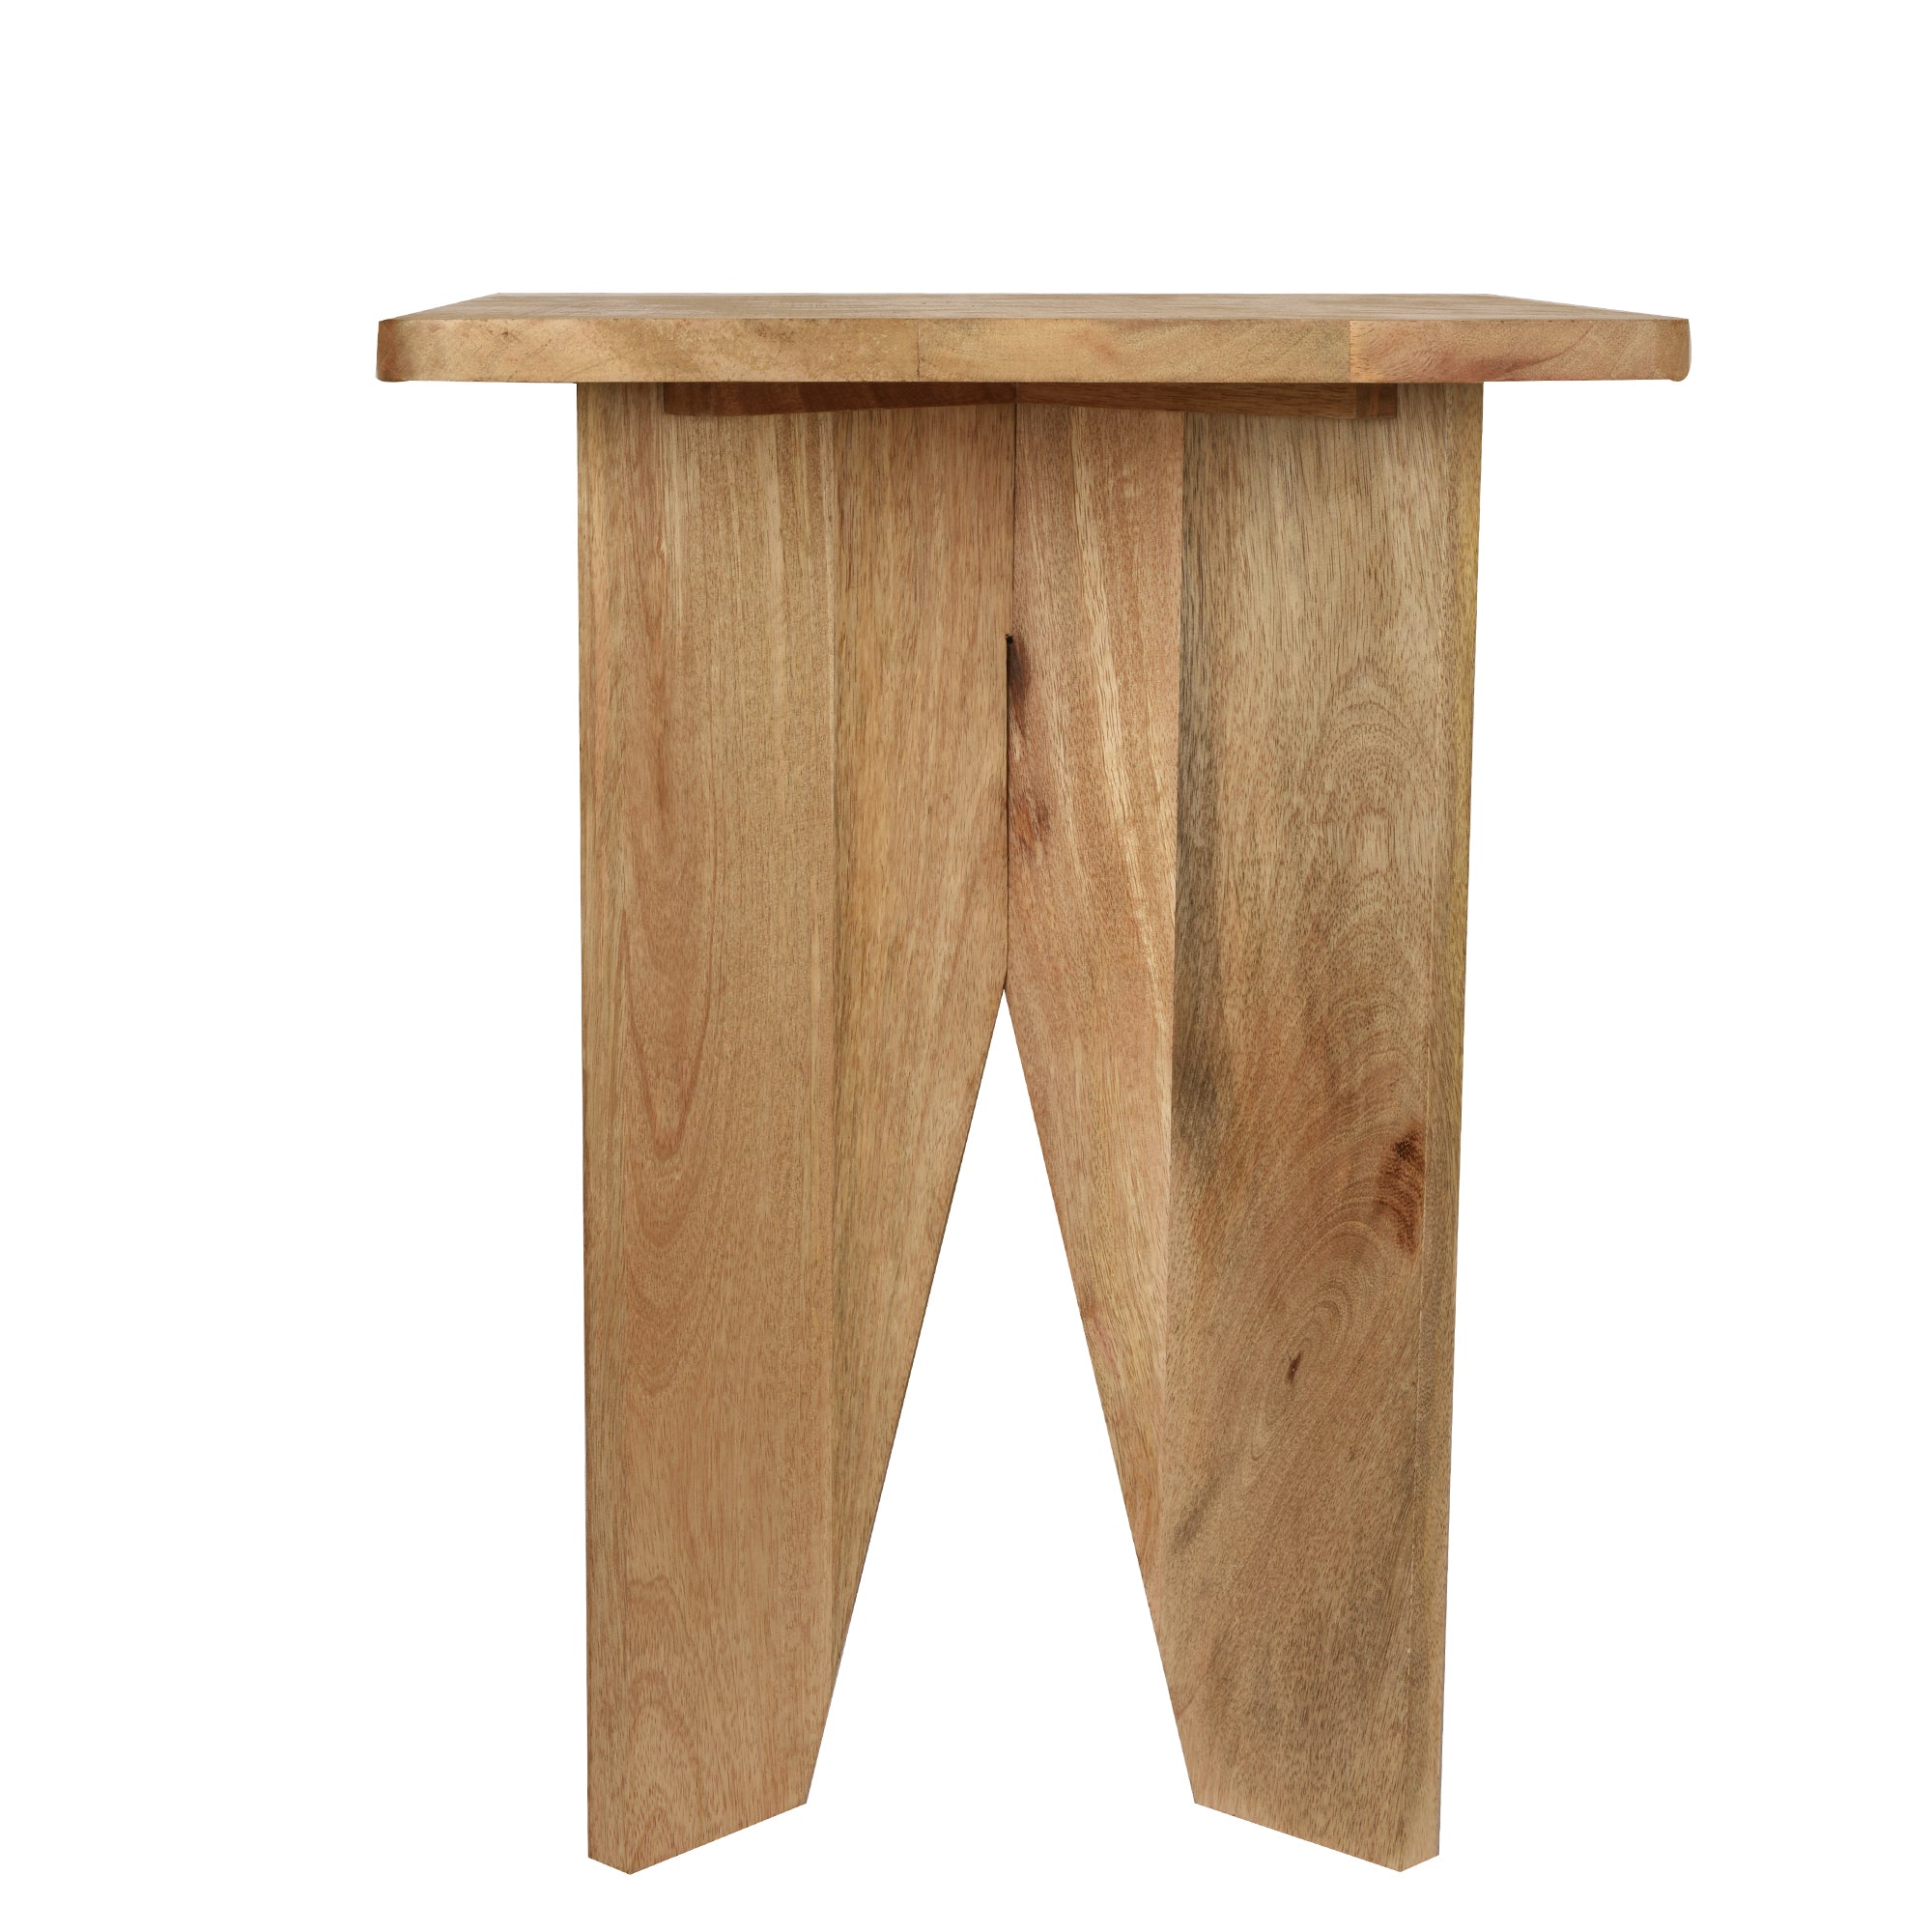 Aachman Mango Natural finish Sqaure End Table